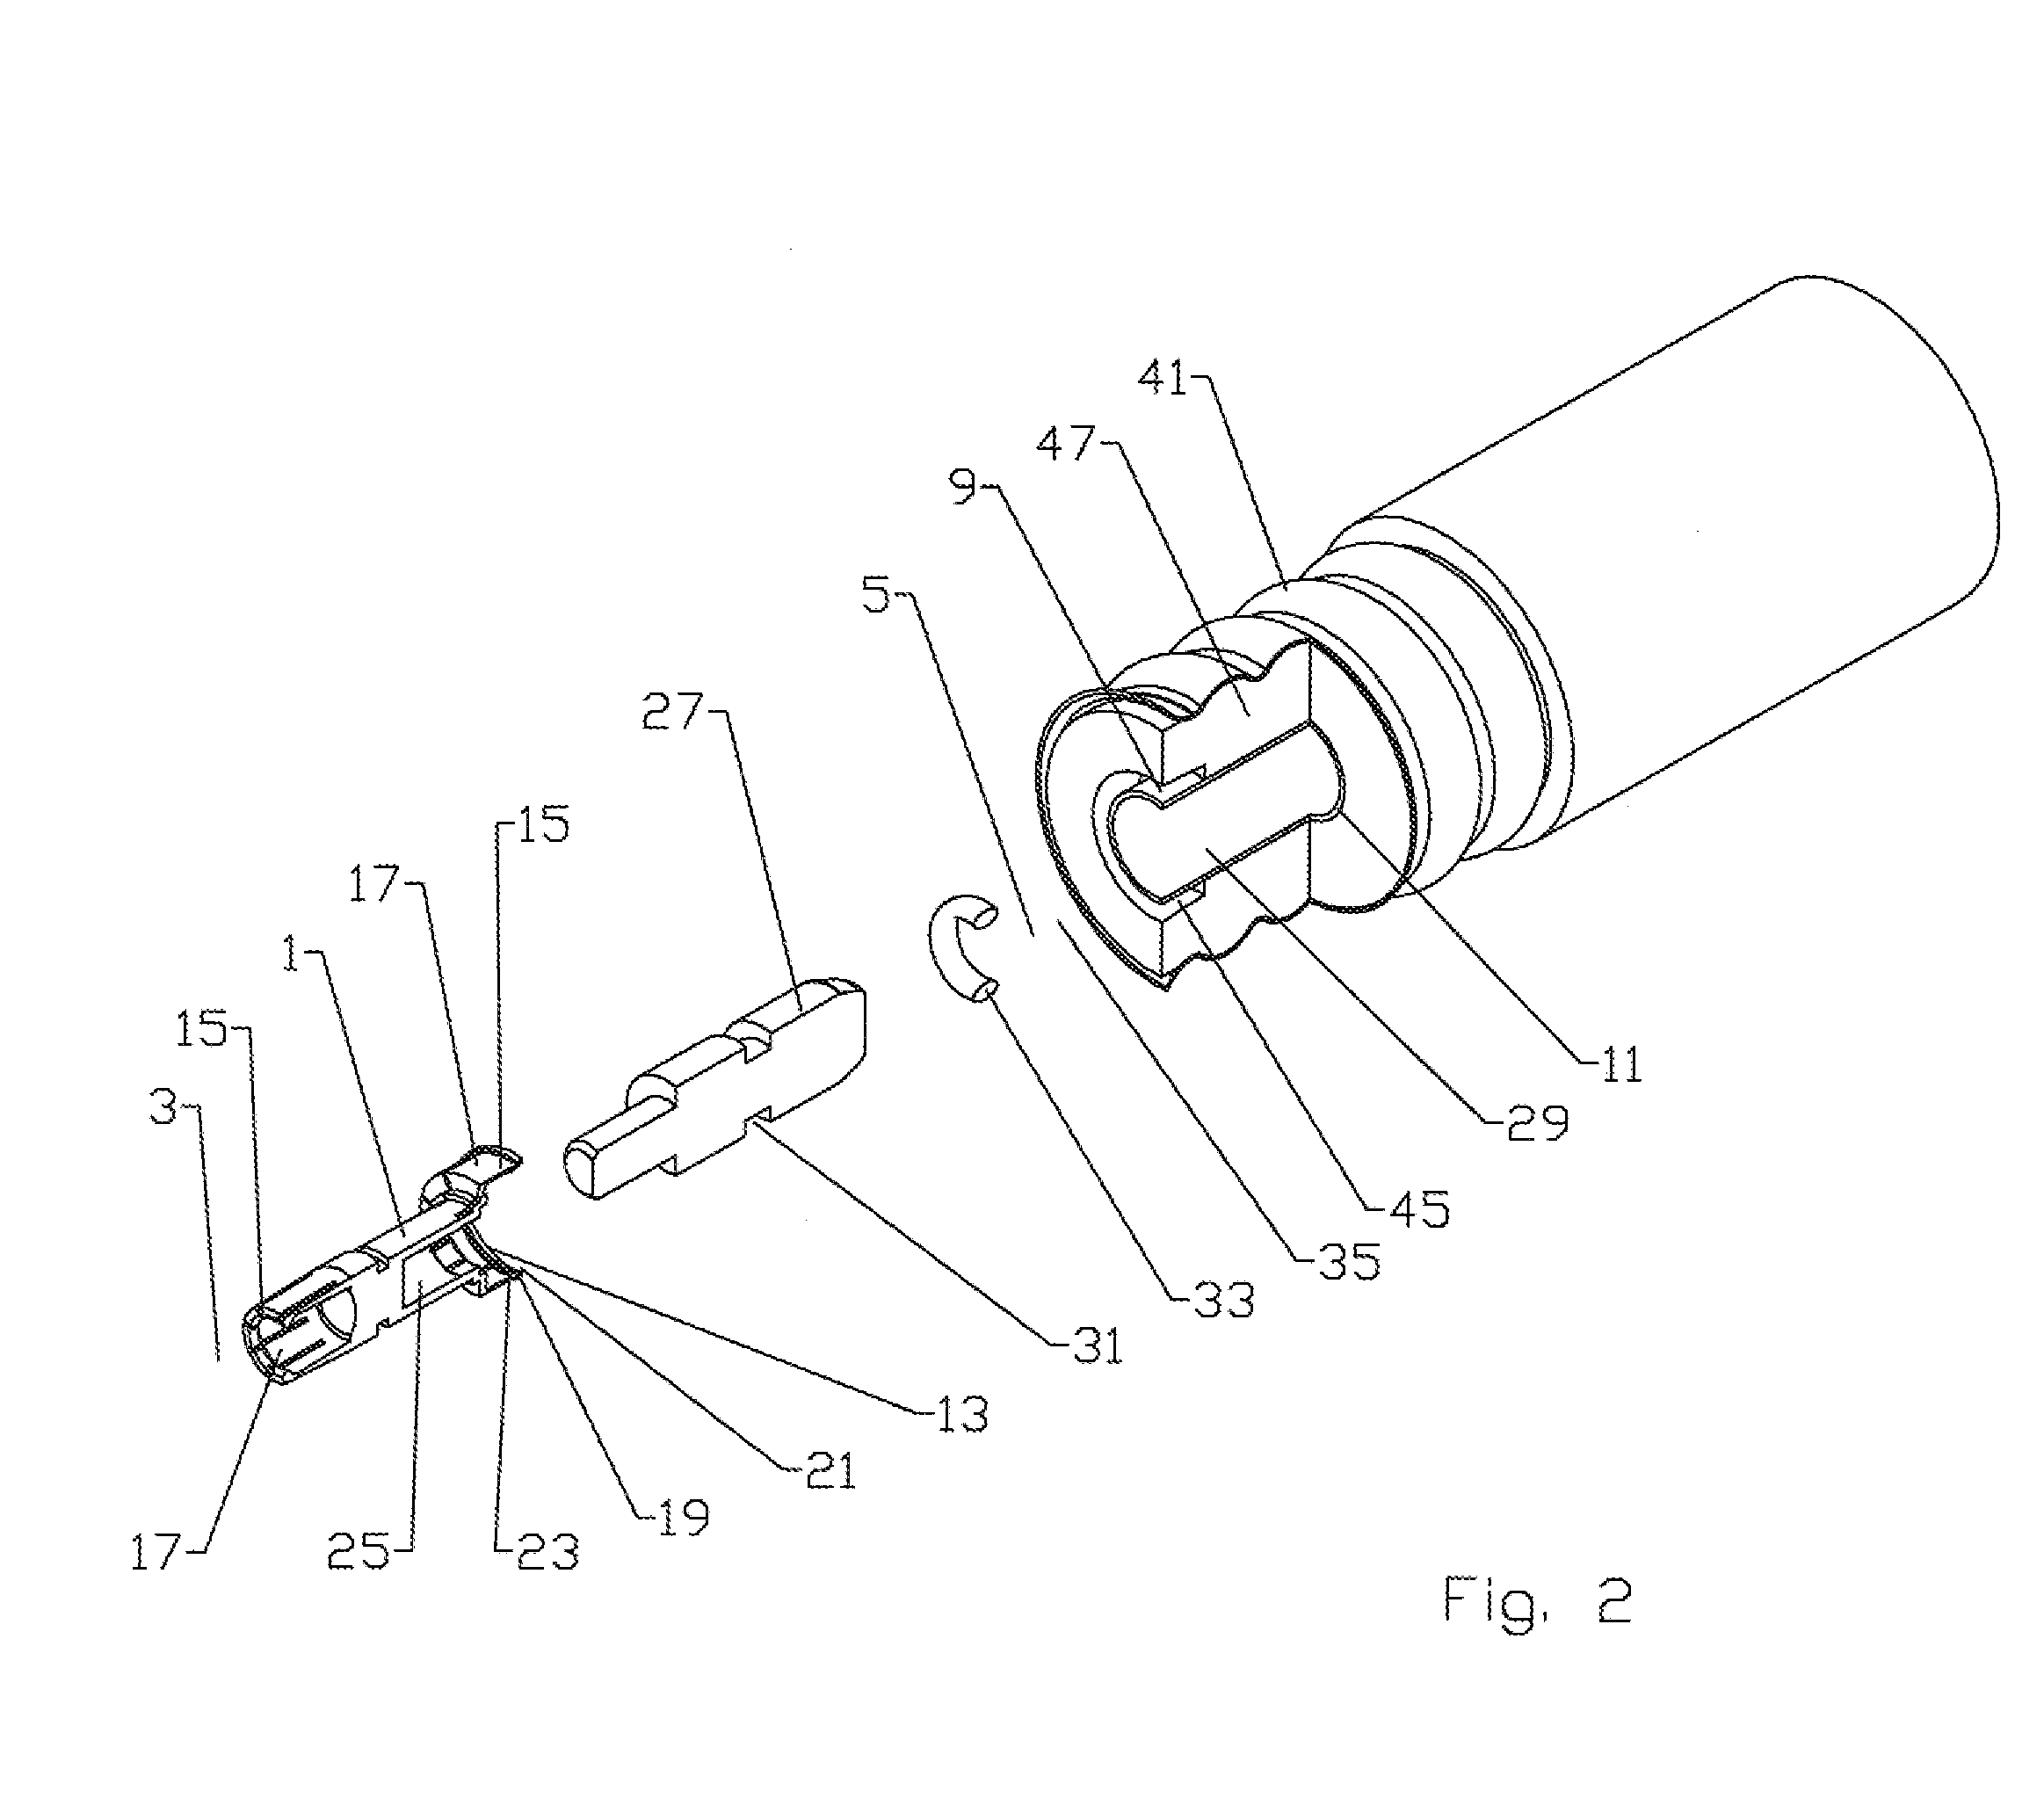 Hollow inner conductor contact for coaxial cable connector